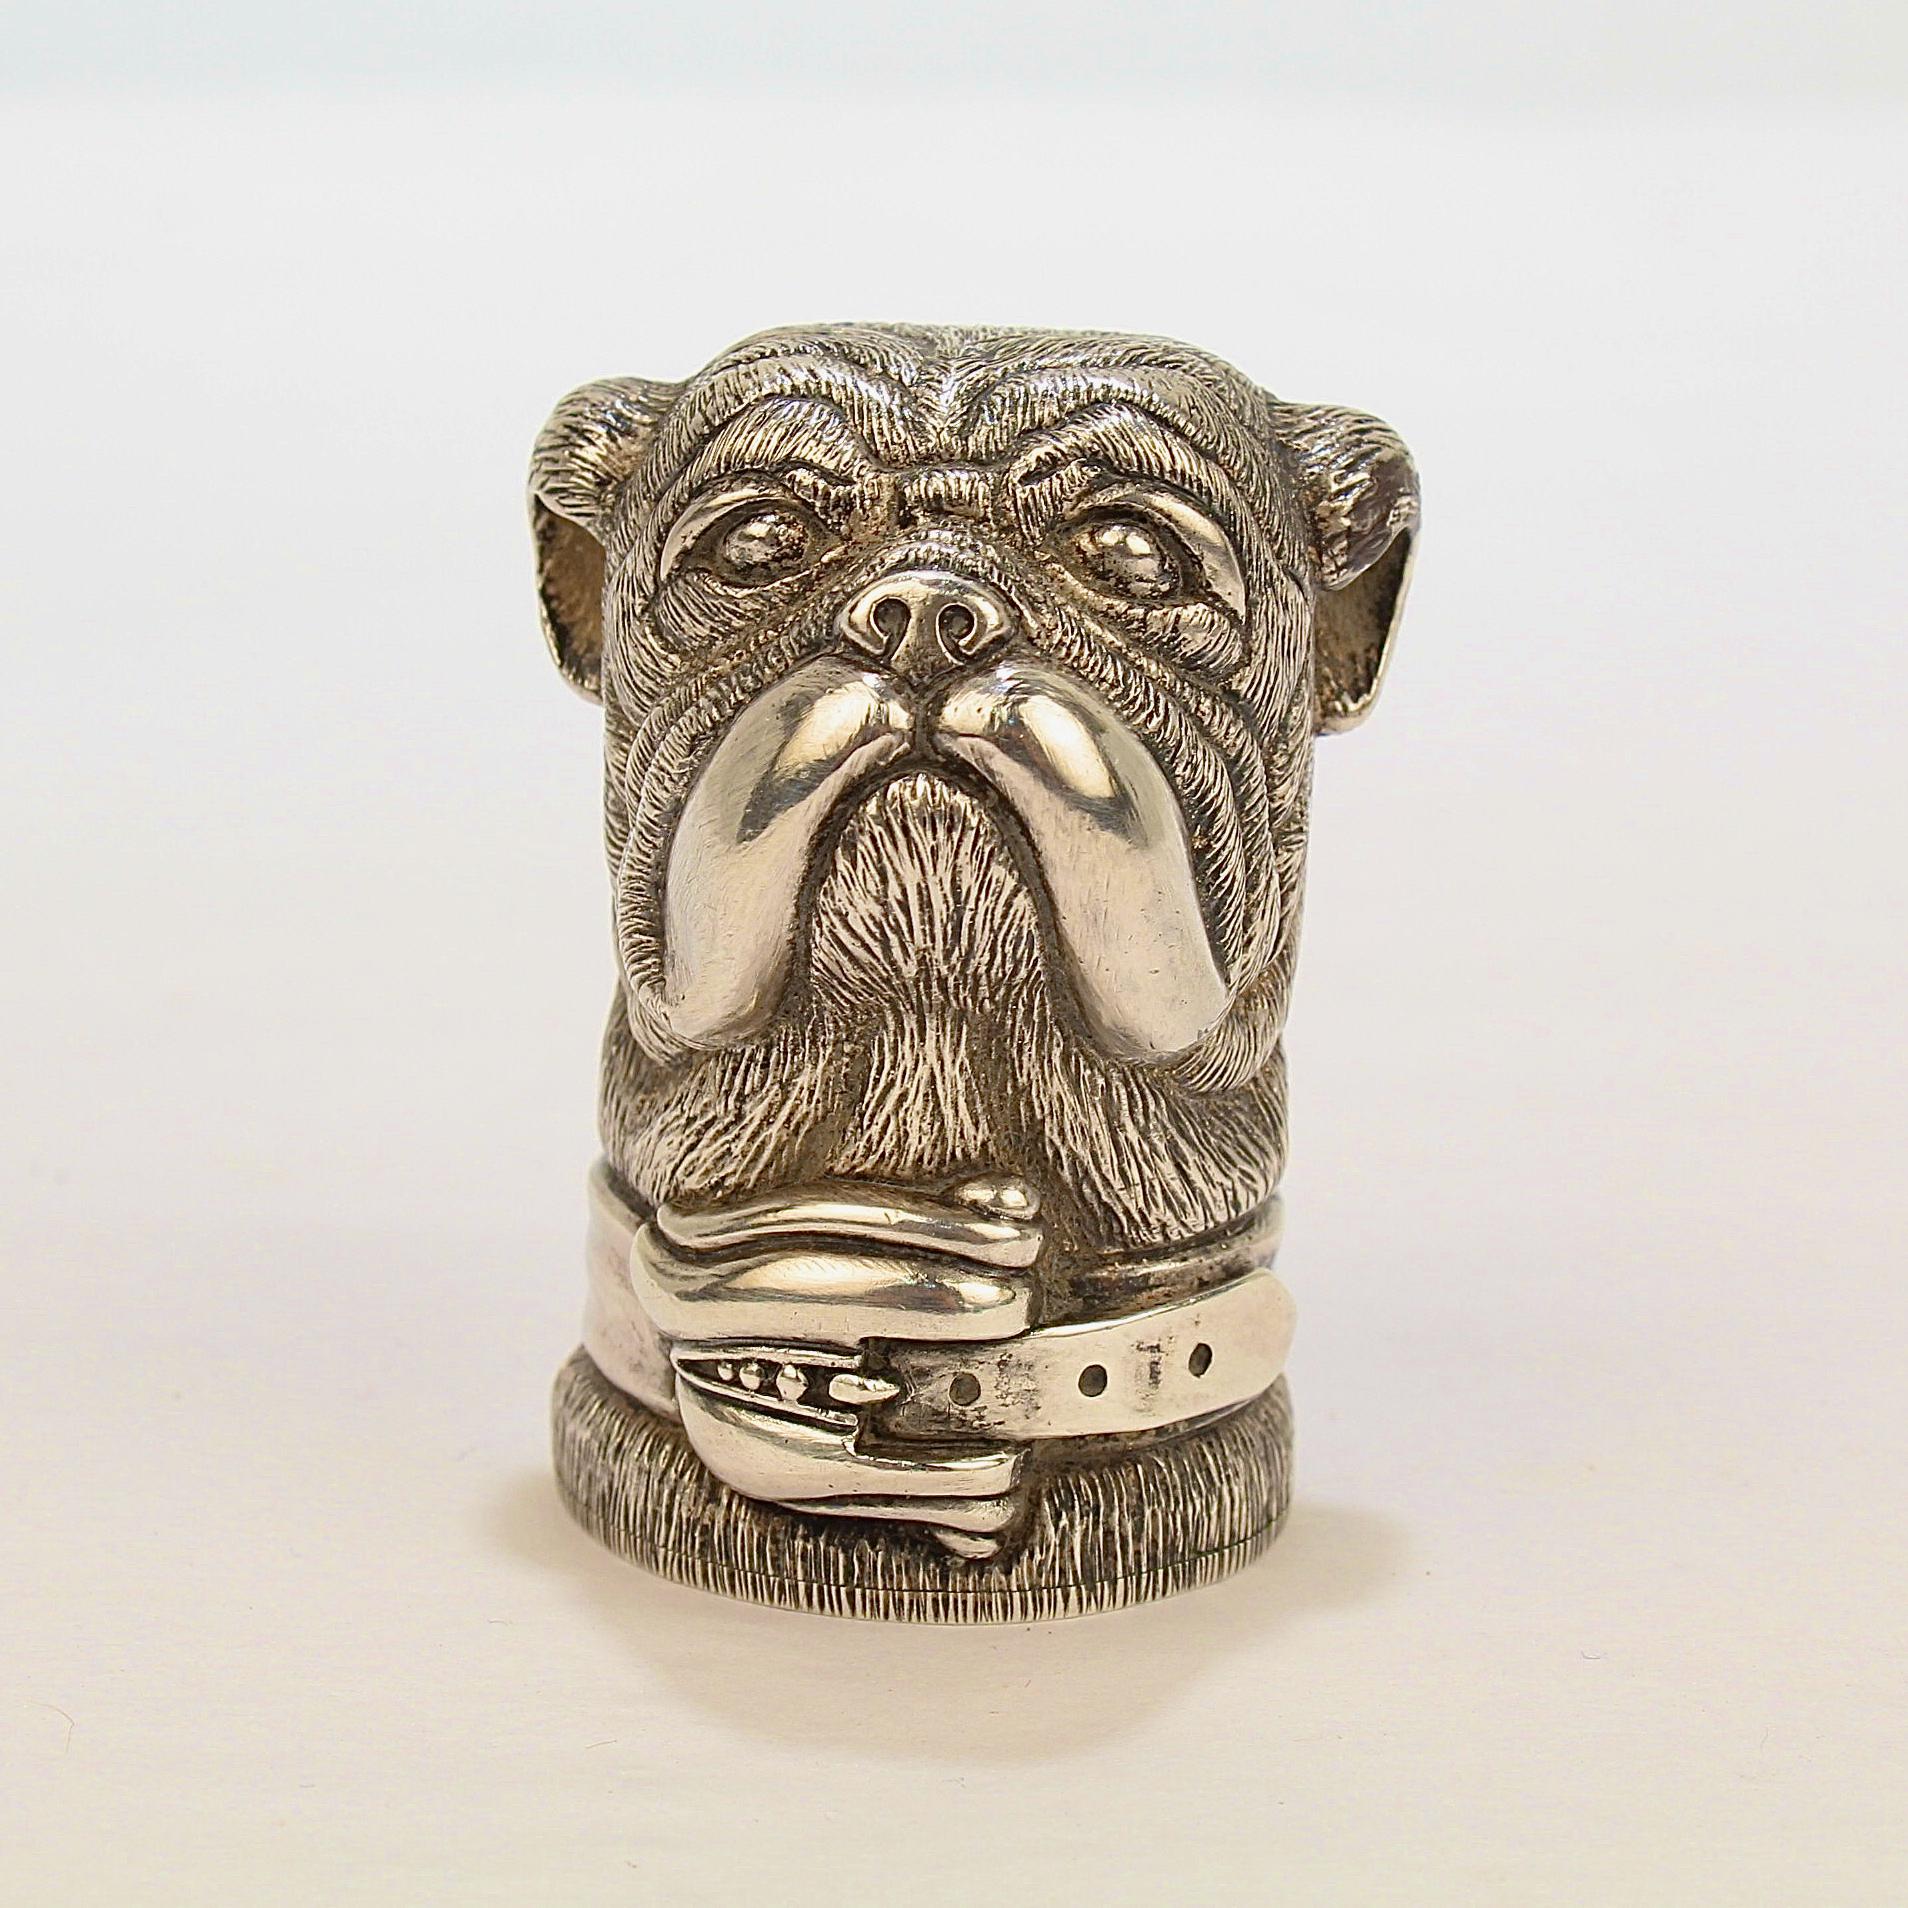 A very fine Barry Kieselstein-Cord sterling silver paperweight in the form of a bulldog.

This rare paperweight was dedicated by Barry & CeCe Kieselstein-Cord and was presumably a personal gift from the jeweler and his wife to 